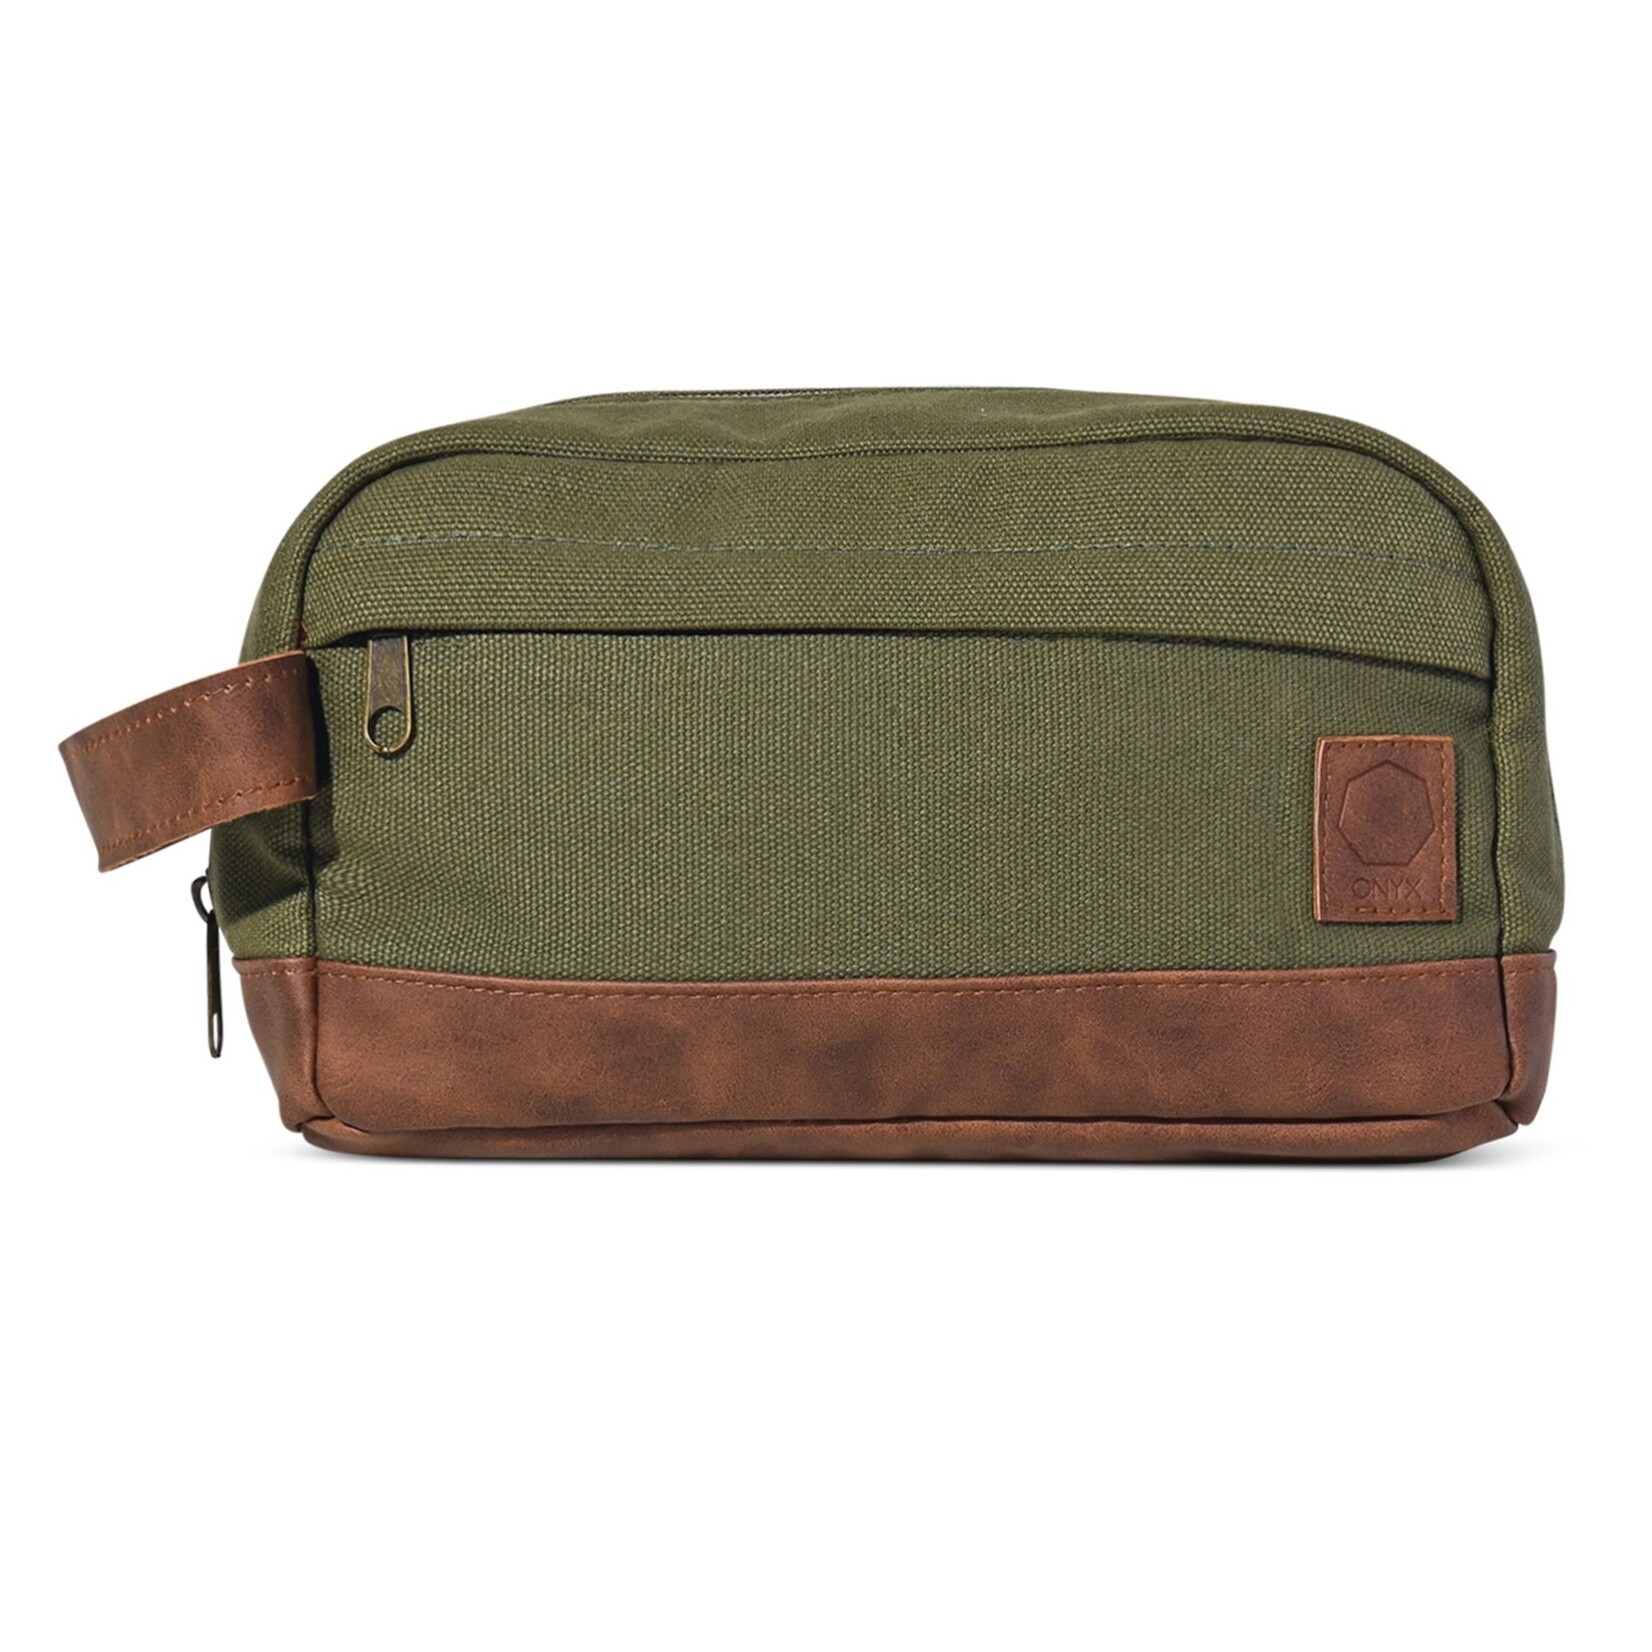 Onyx Outfitters NW Travel Dopp Kit